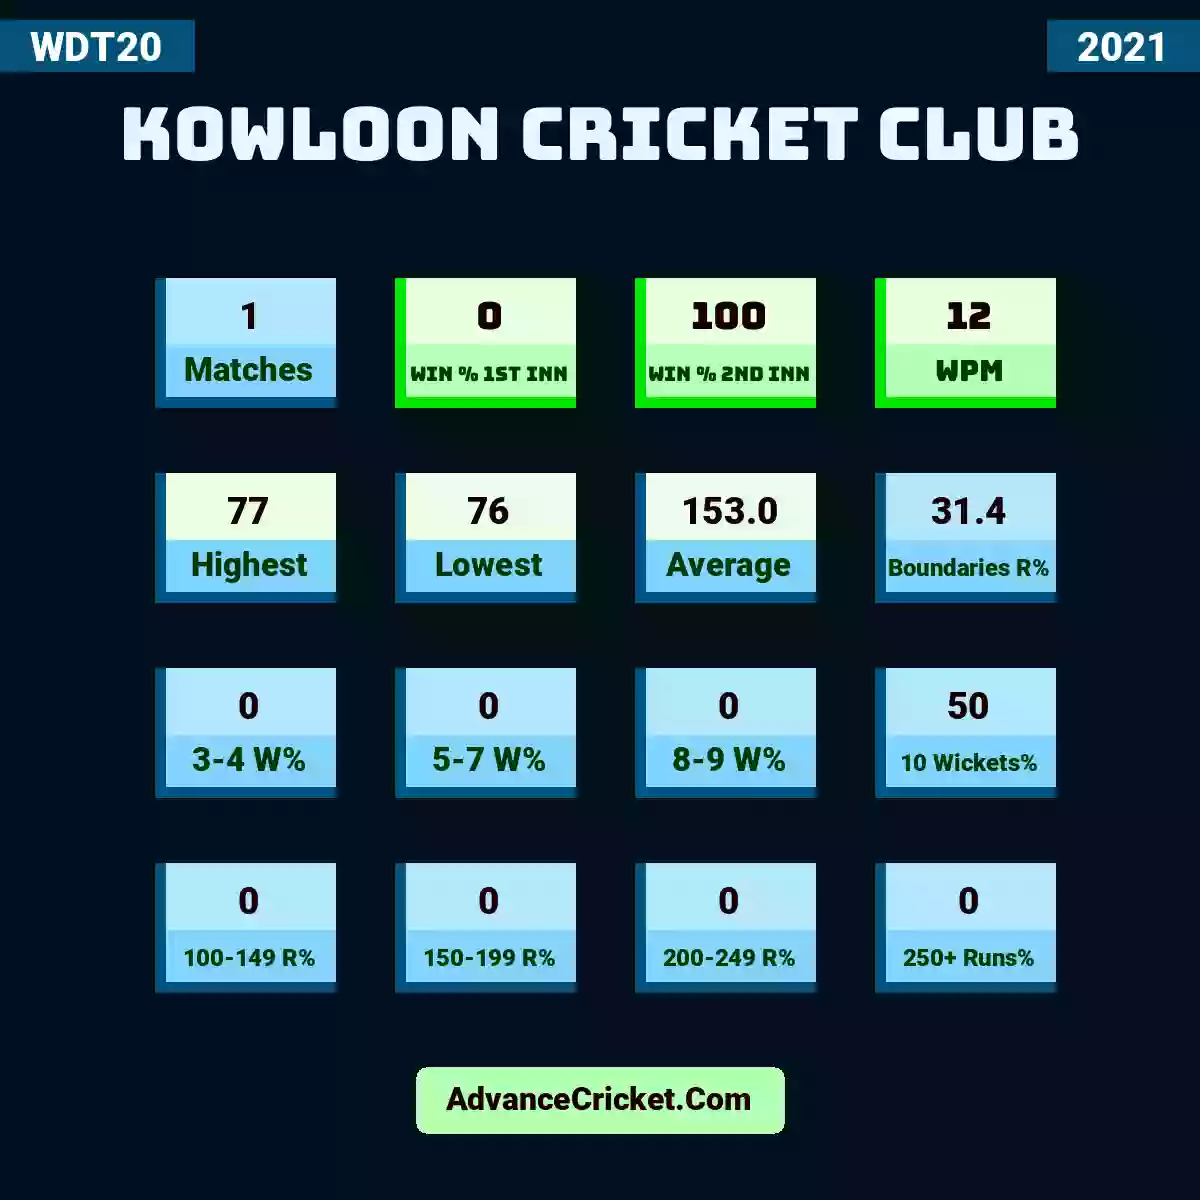 Image showing Kowloon Cricket Club with Matches: 1, Win % 1st Inn: 0, Win % 2nd Inn: 100, WPM: 12, Highest: 77, Lowest: 76, Average: 153.0, Boundaries R%: 31.4, 3-4 W%: 0, 5-7 W%: 0, 8-9 W%: 0, 10 Wickets%: 50, 100-149 R%: 0, 150-199 R%: 0, 200-249 R%: 0, 250+ Runs%: 0.